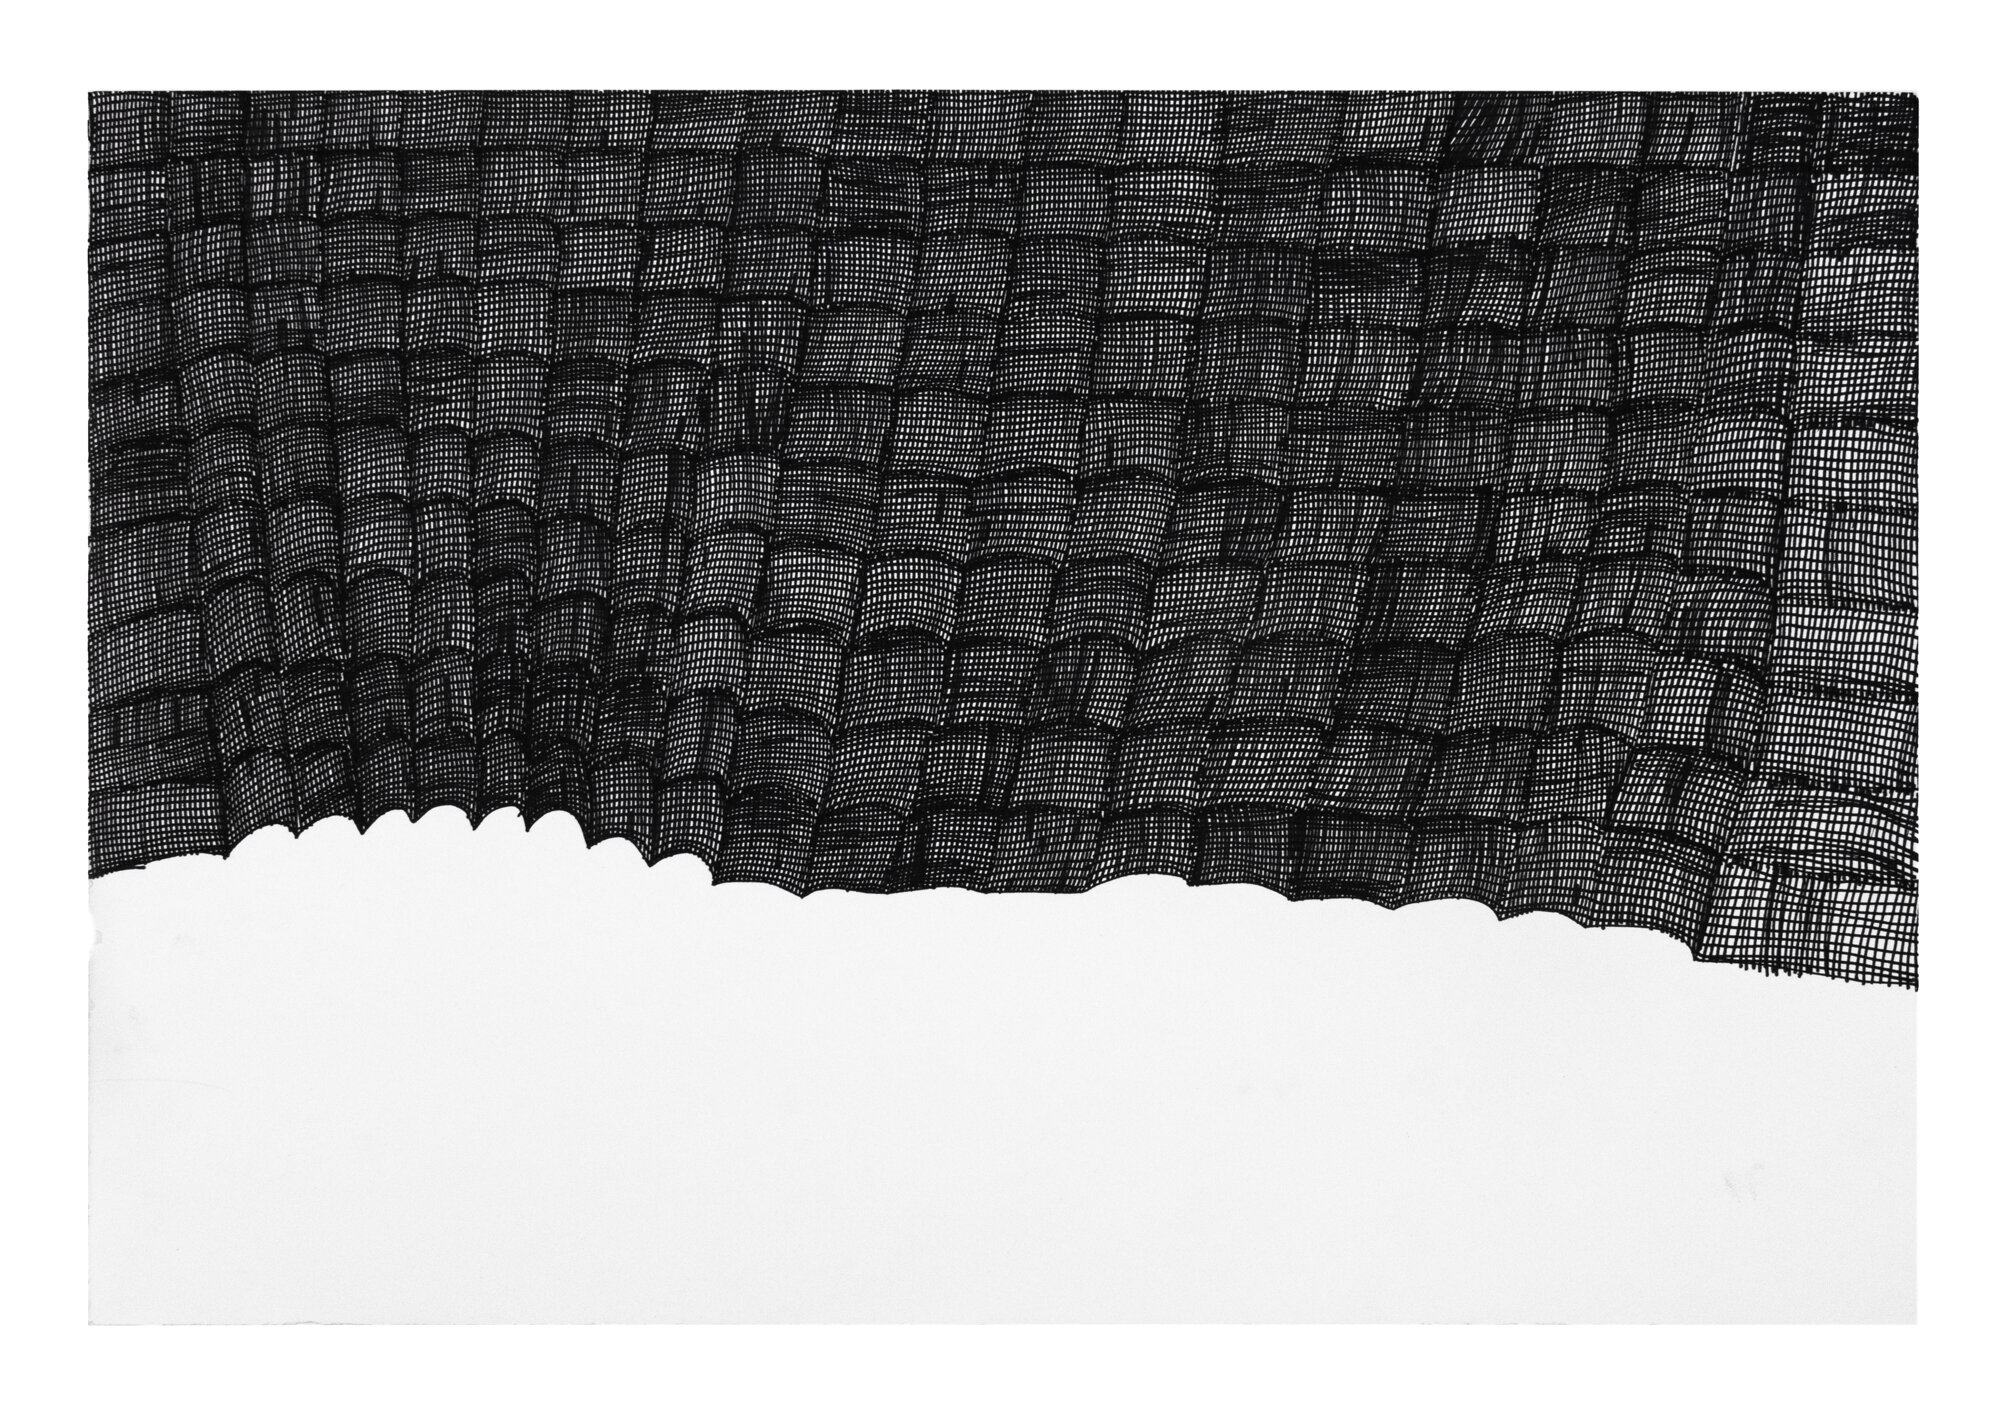 Susan Janow, Untitled (SJ 278), 2019, Ink on paper, 12 x 22.25 inches